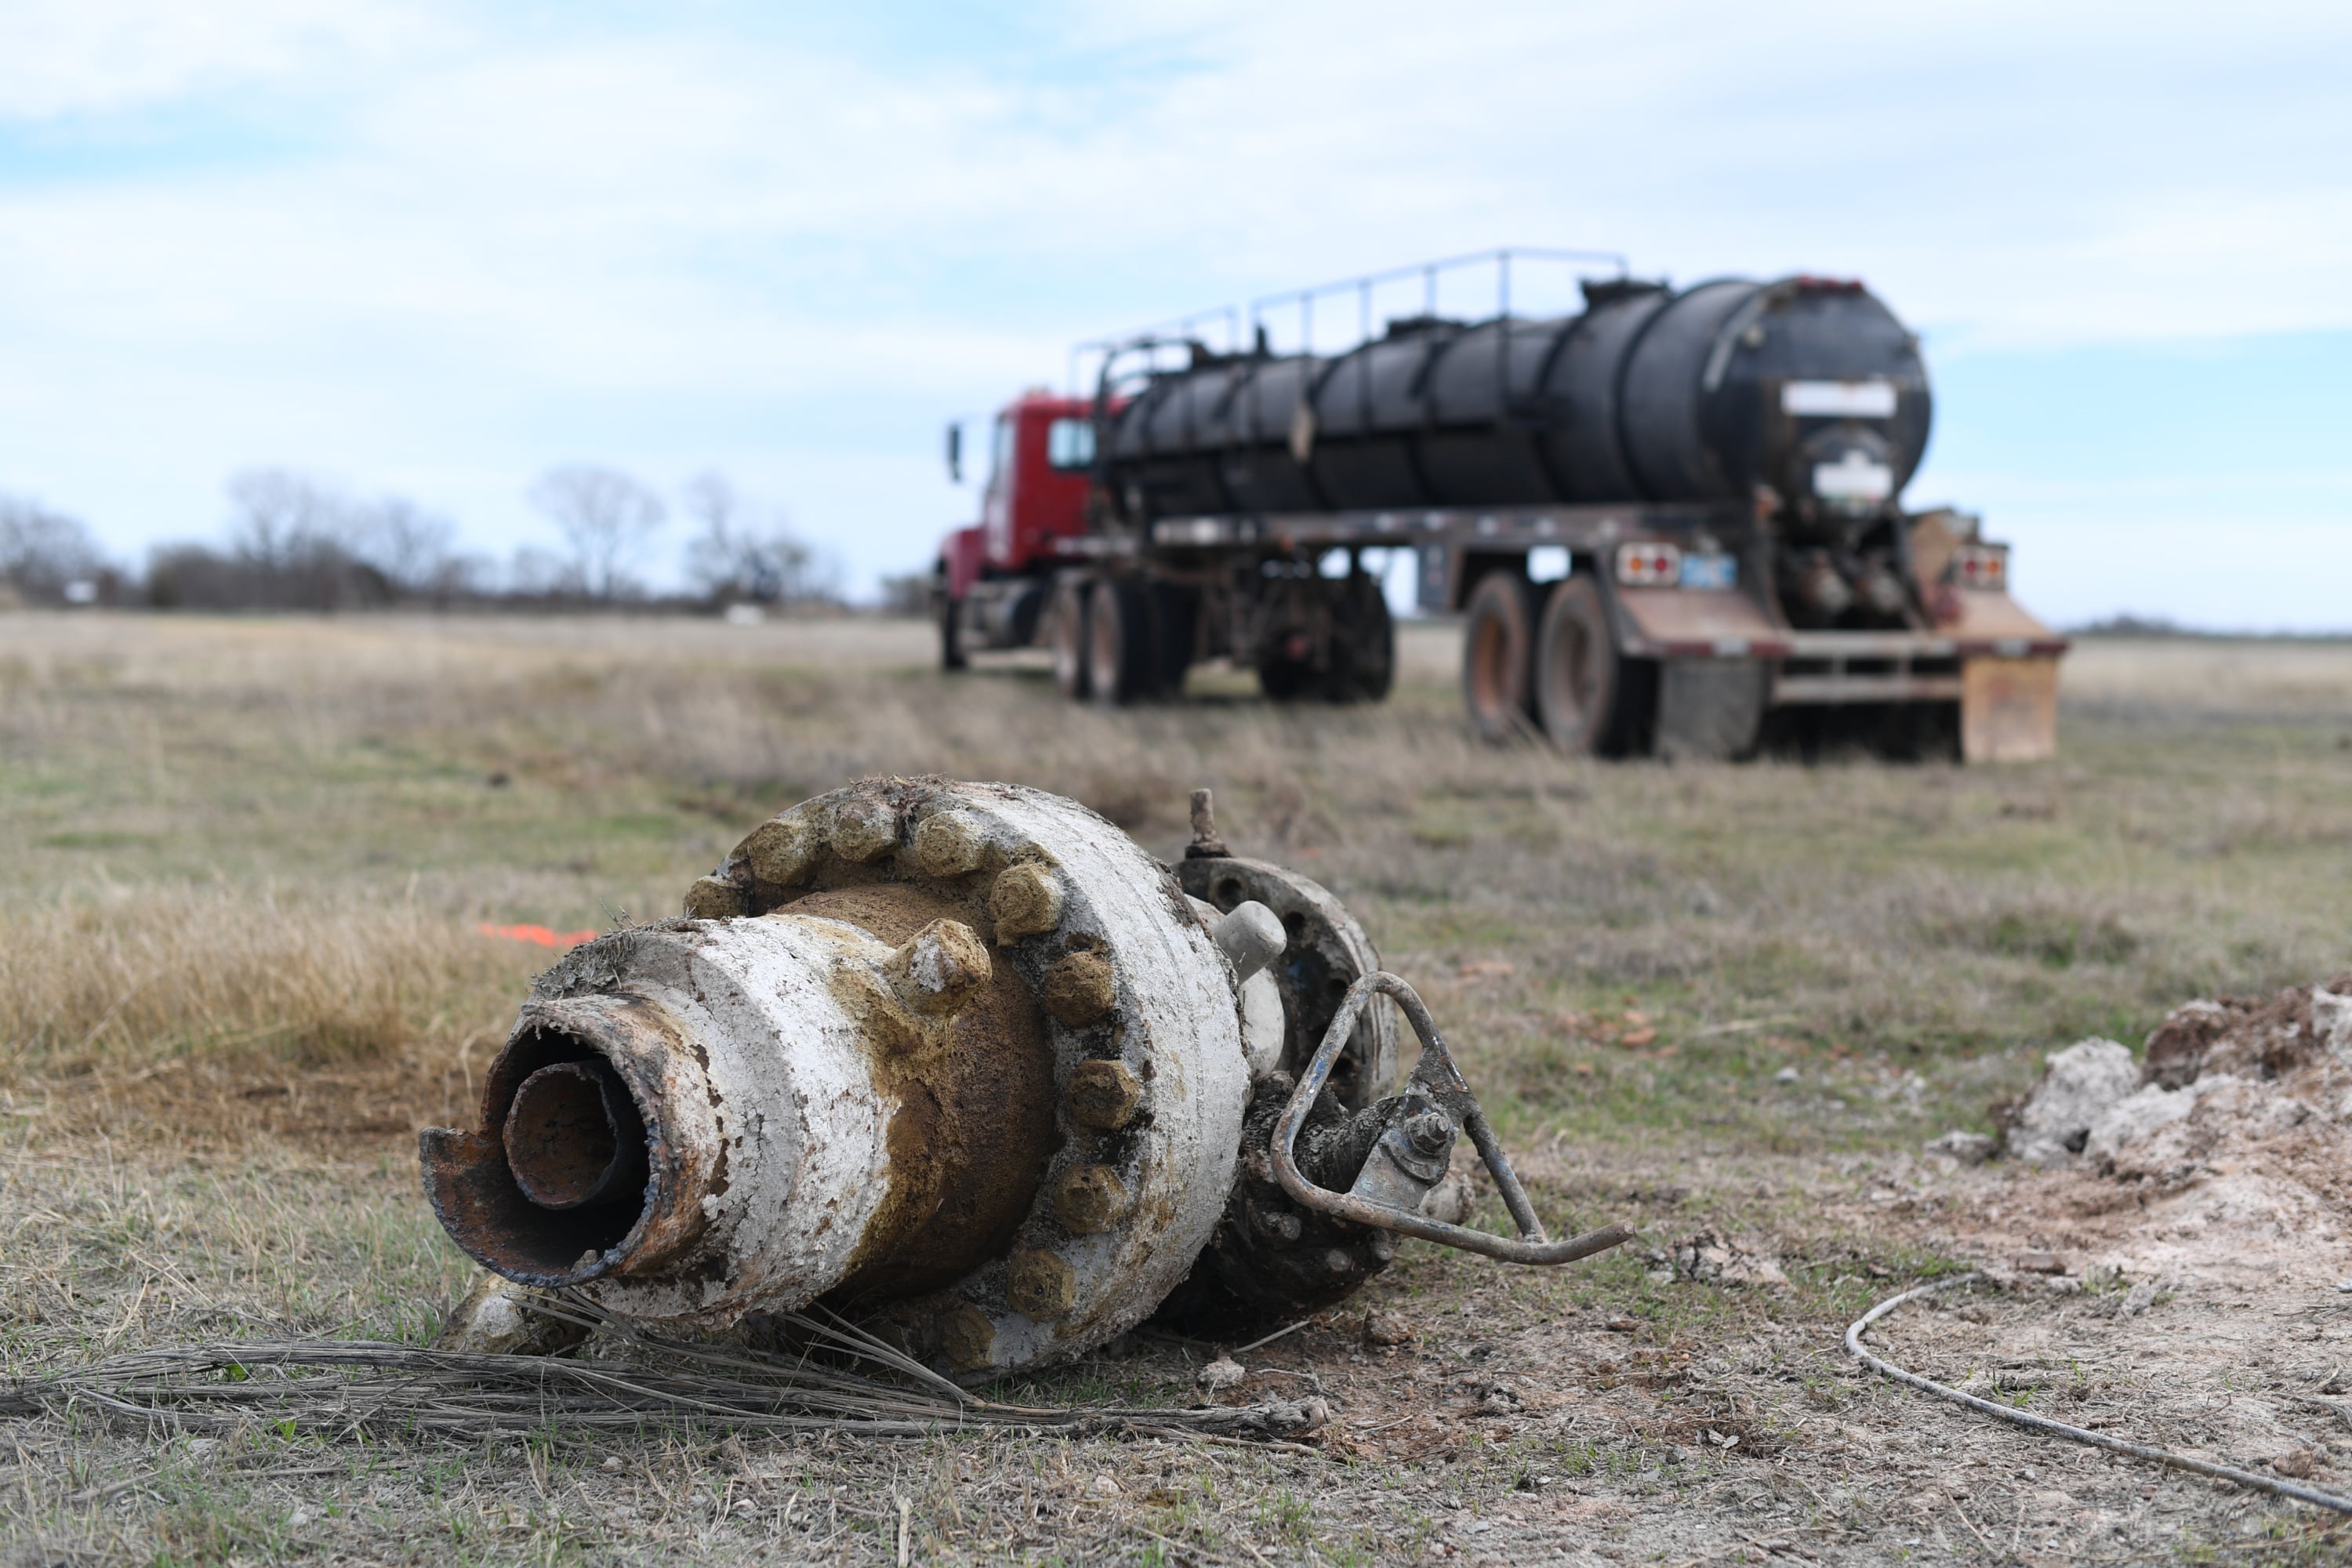 A rusting piece of equipment sits in the gras with a large truck in the background.